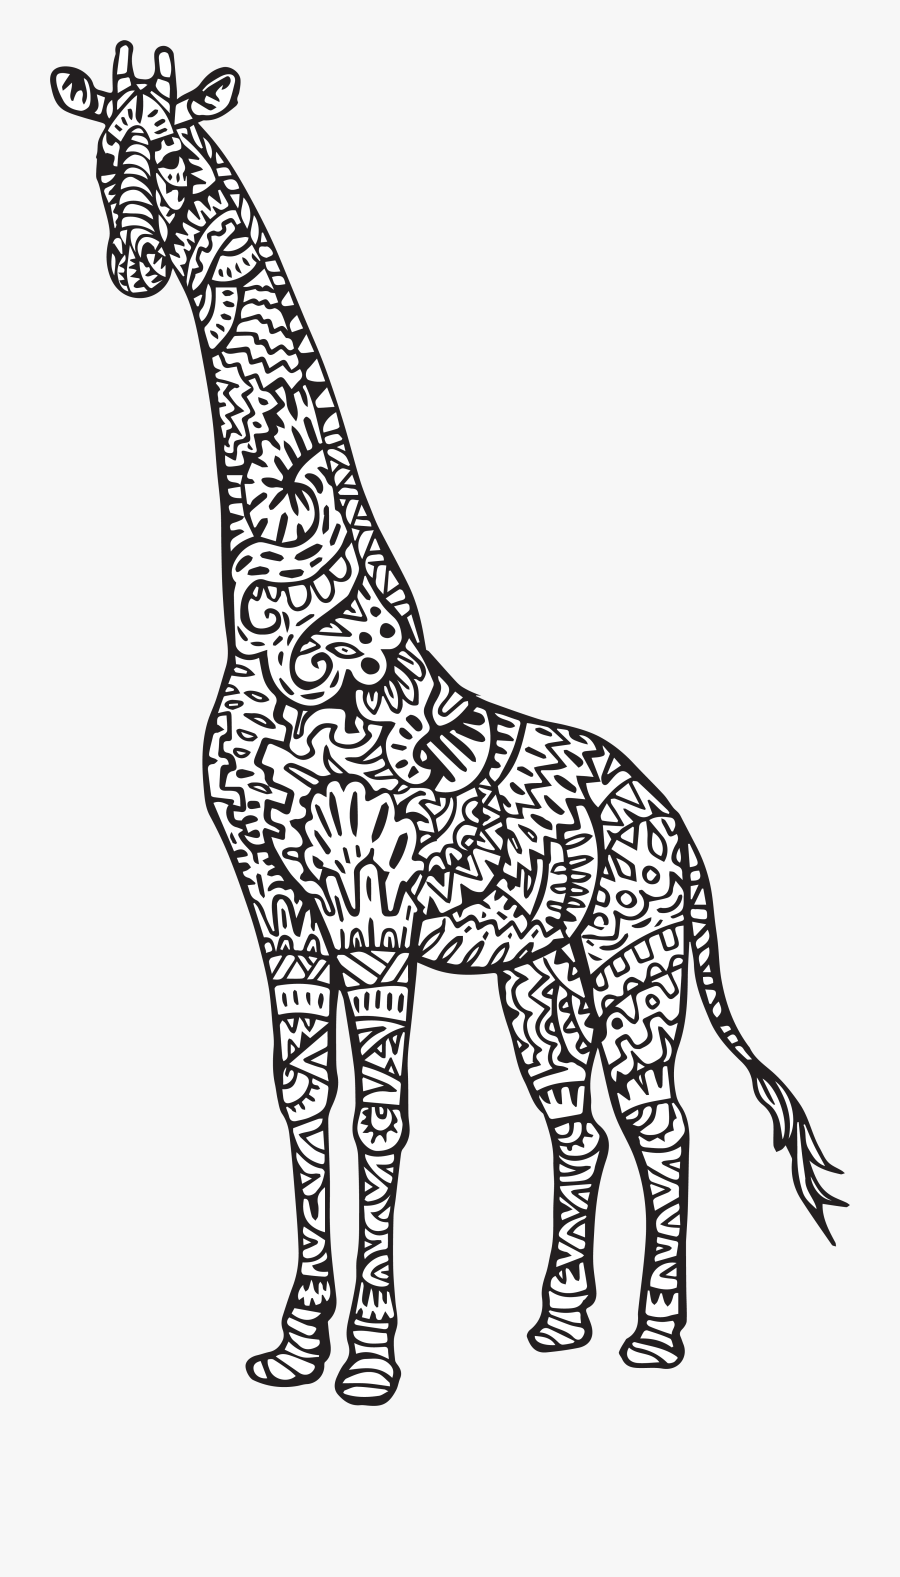 Coloring Baby Jokingart Com - Free Adult Colouring Page Giraffe, Transparent Clipart